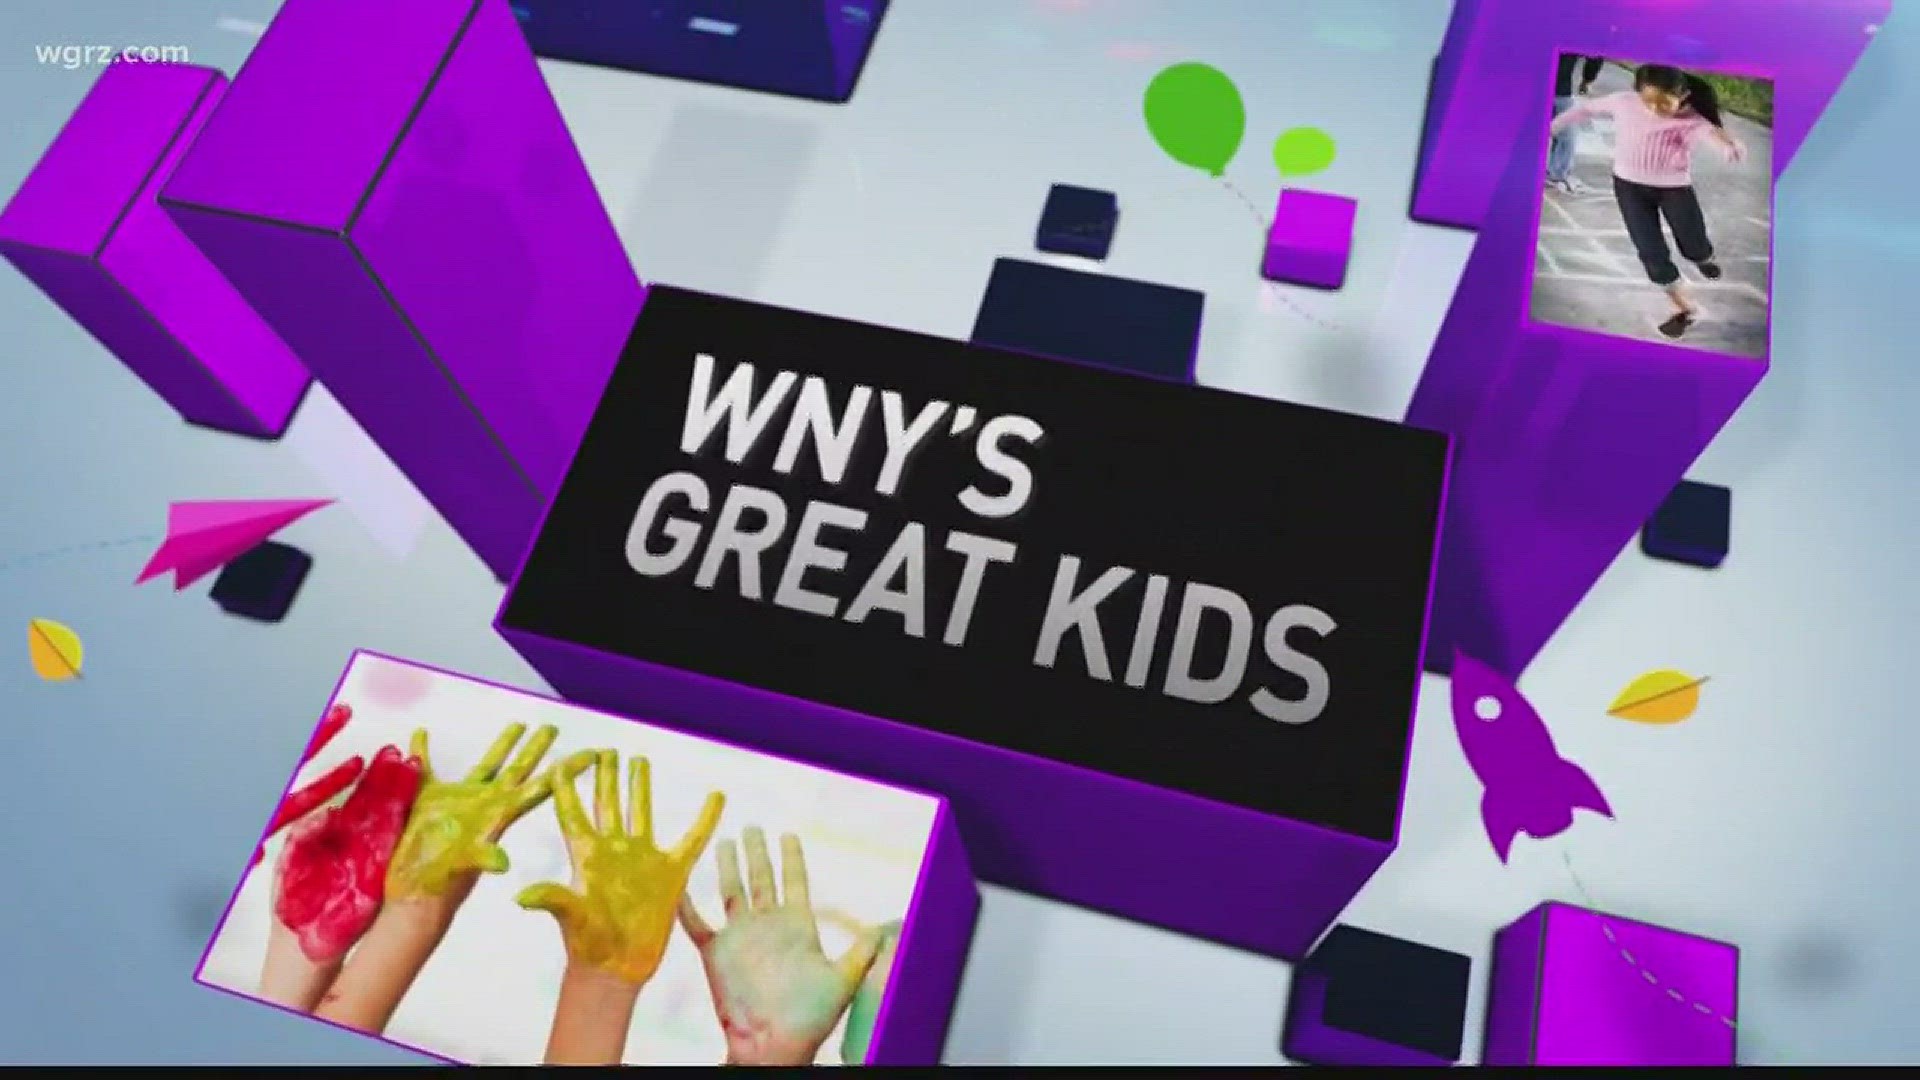 WNY's Great Kids: South Davis Elementary Makes "Give Love" Music Video